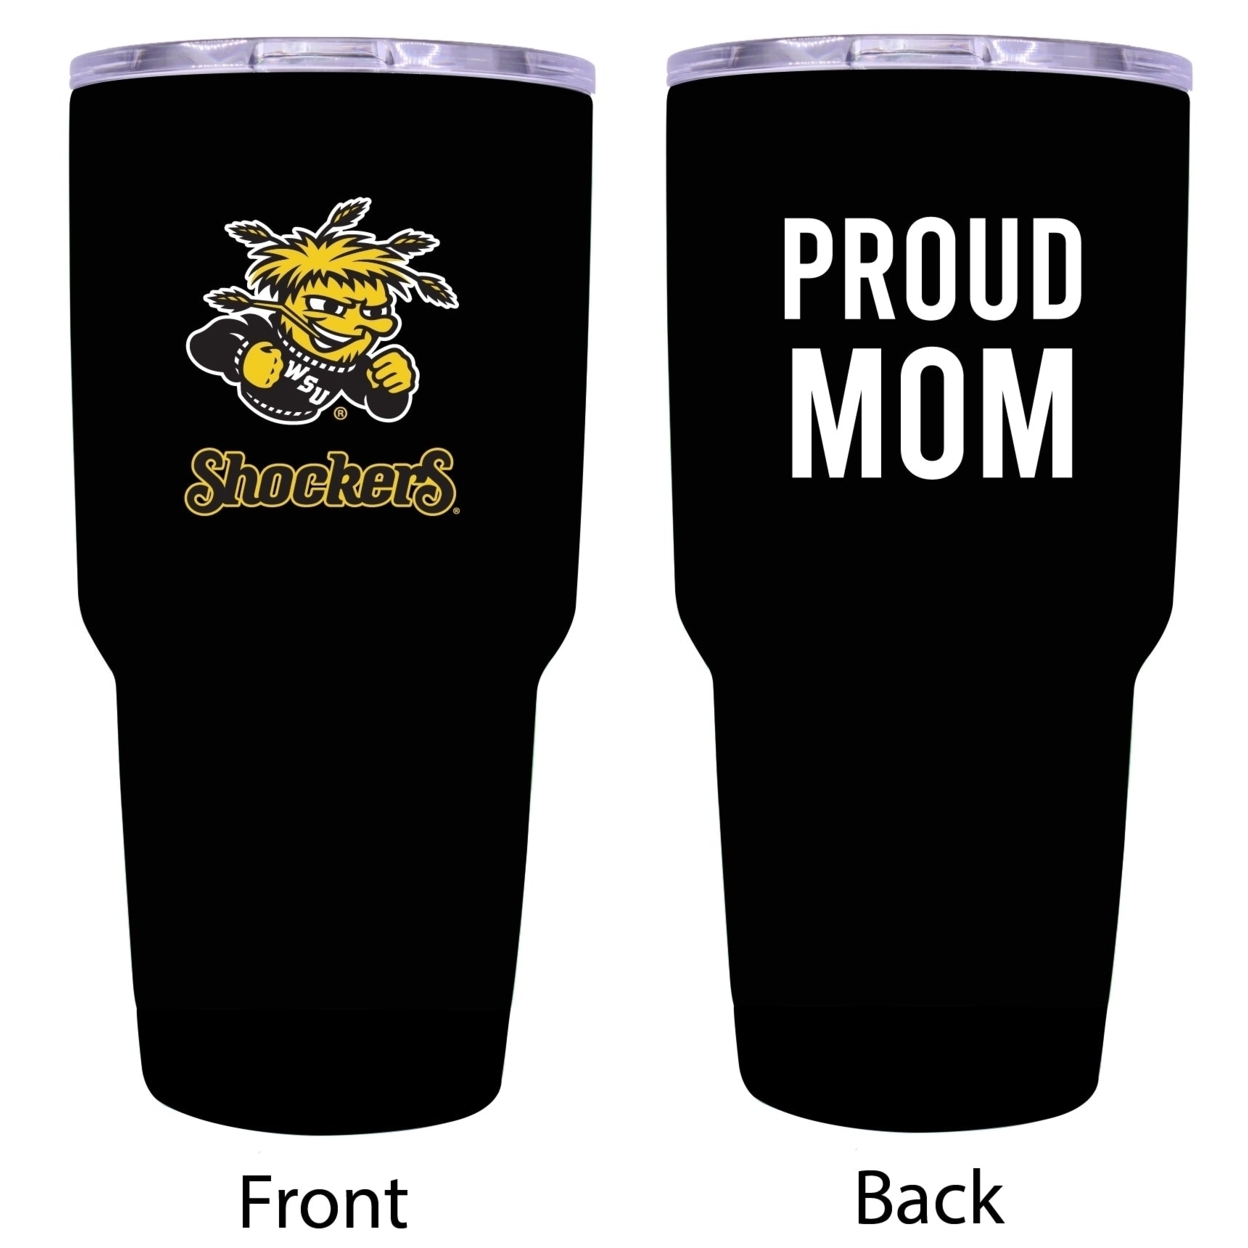 Wichita State Shockers Proud Mom 24 Oz Insulated Stainless Steel Tumblers Choose Your Color. - Black